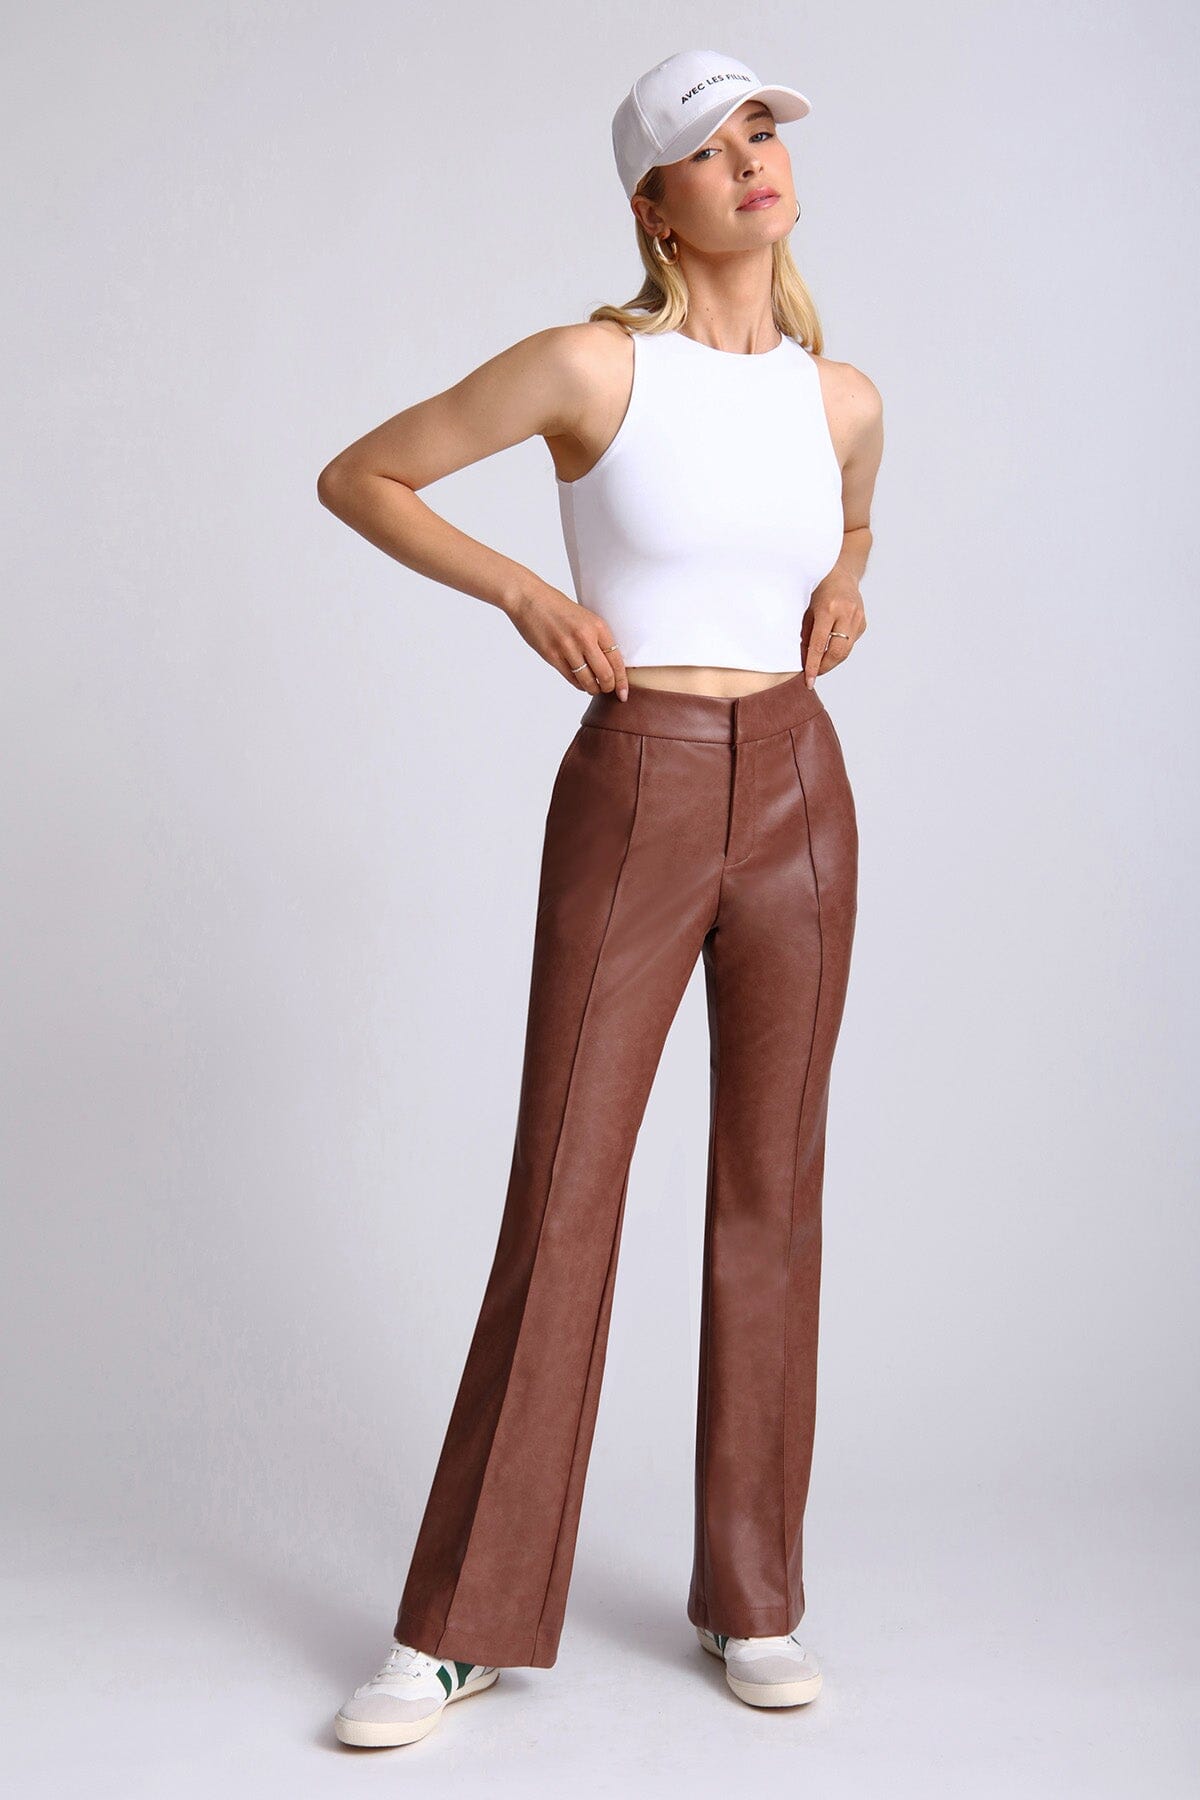 Brown faux leather high waisted flare leg trouser pants by Avec Les Filles - figure flattering day to night trousers for women